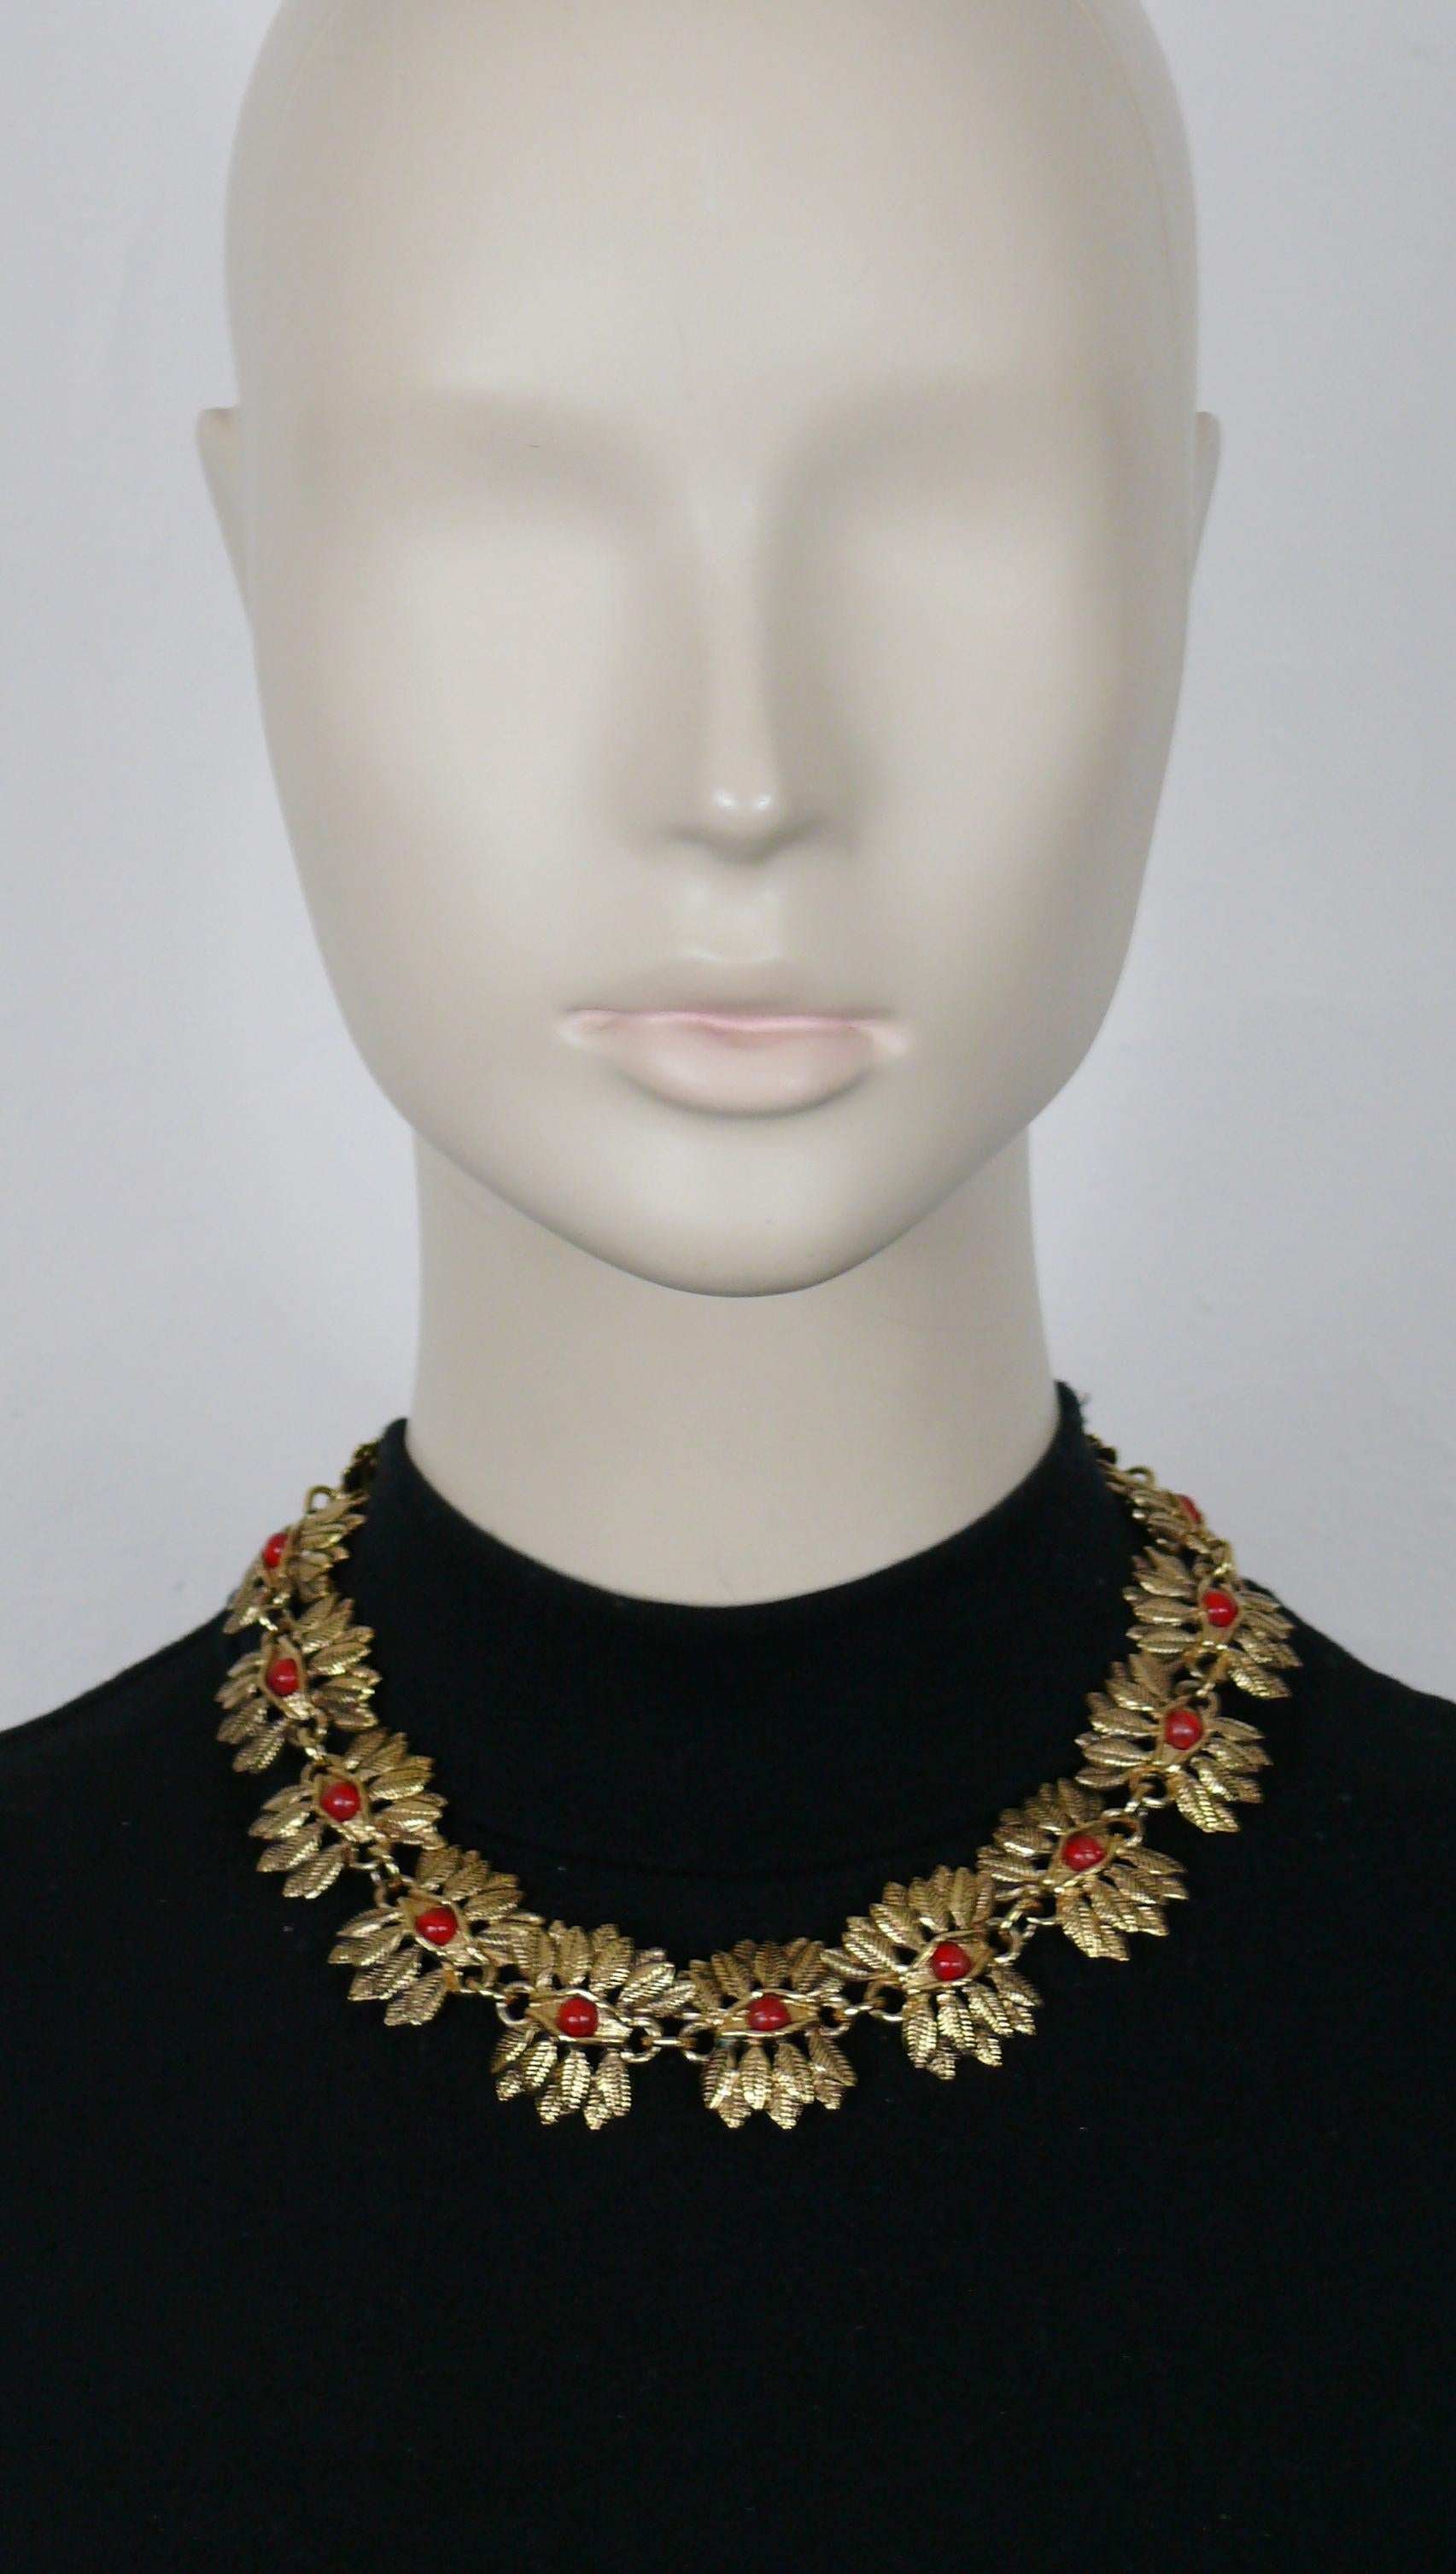 GUY LAROCHE vintage antiqued gold tone link necklace featuring feathers and eyes embellished with marbled red glass cabochons.

T-bar and toggle closure.

Embossed GUY LAROCHE Paris.

Indicative measurements : length approx. 44.5 cm (17.52 inches) /